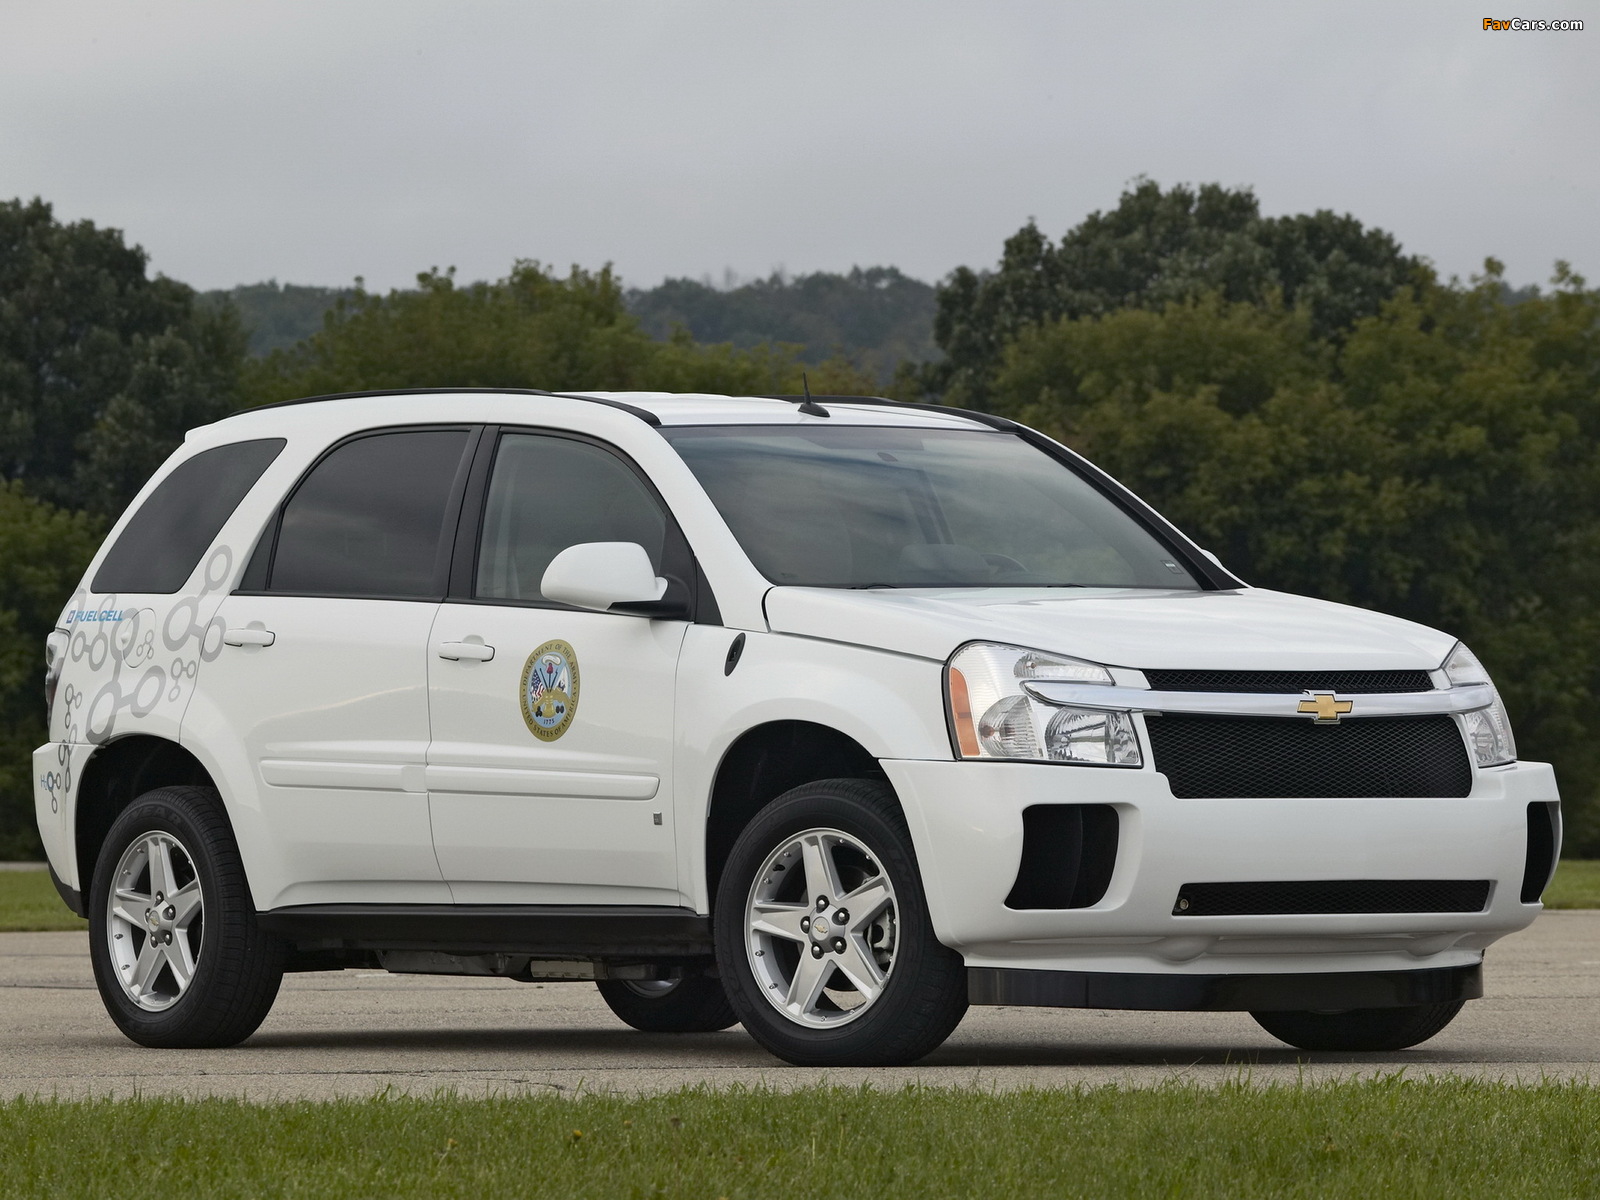 Chevrolet Equinox Fuel Cell U.S. Army Prototype 2006 images (1600 x 1200)